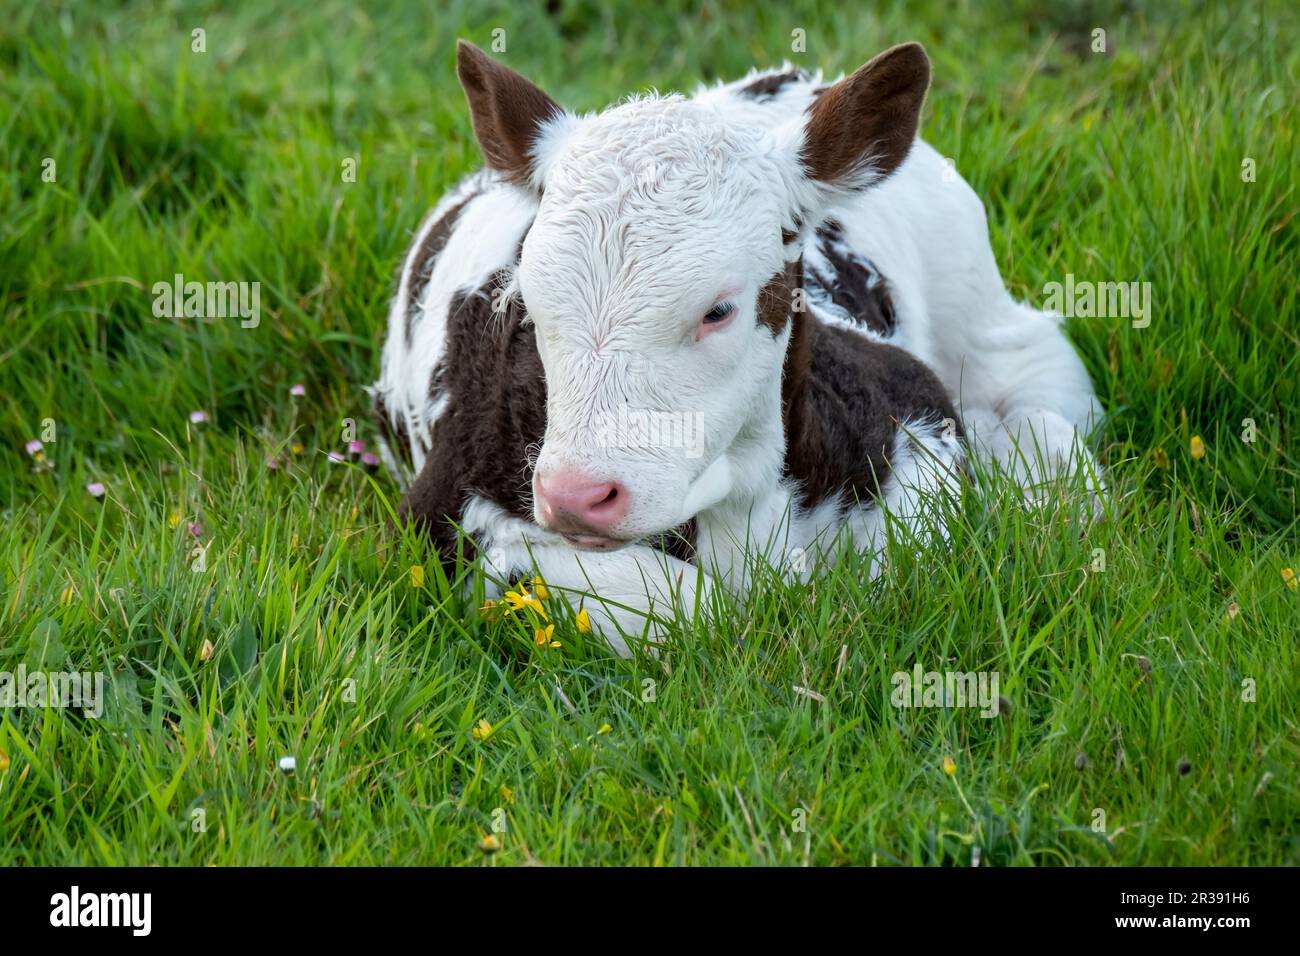 A young baby cow resting on a meadow in Ireland. Stock Photo